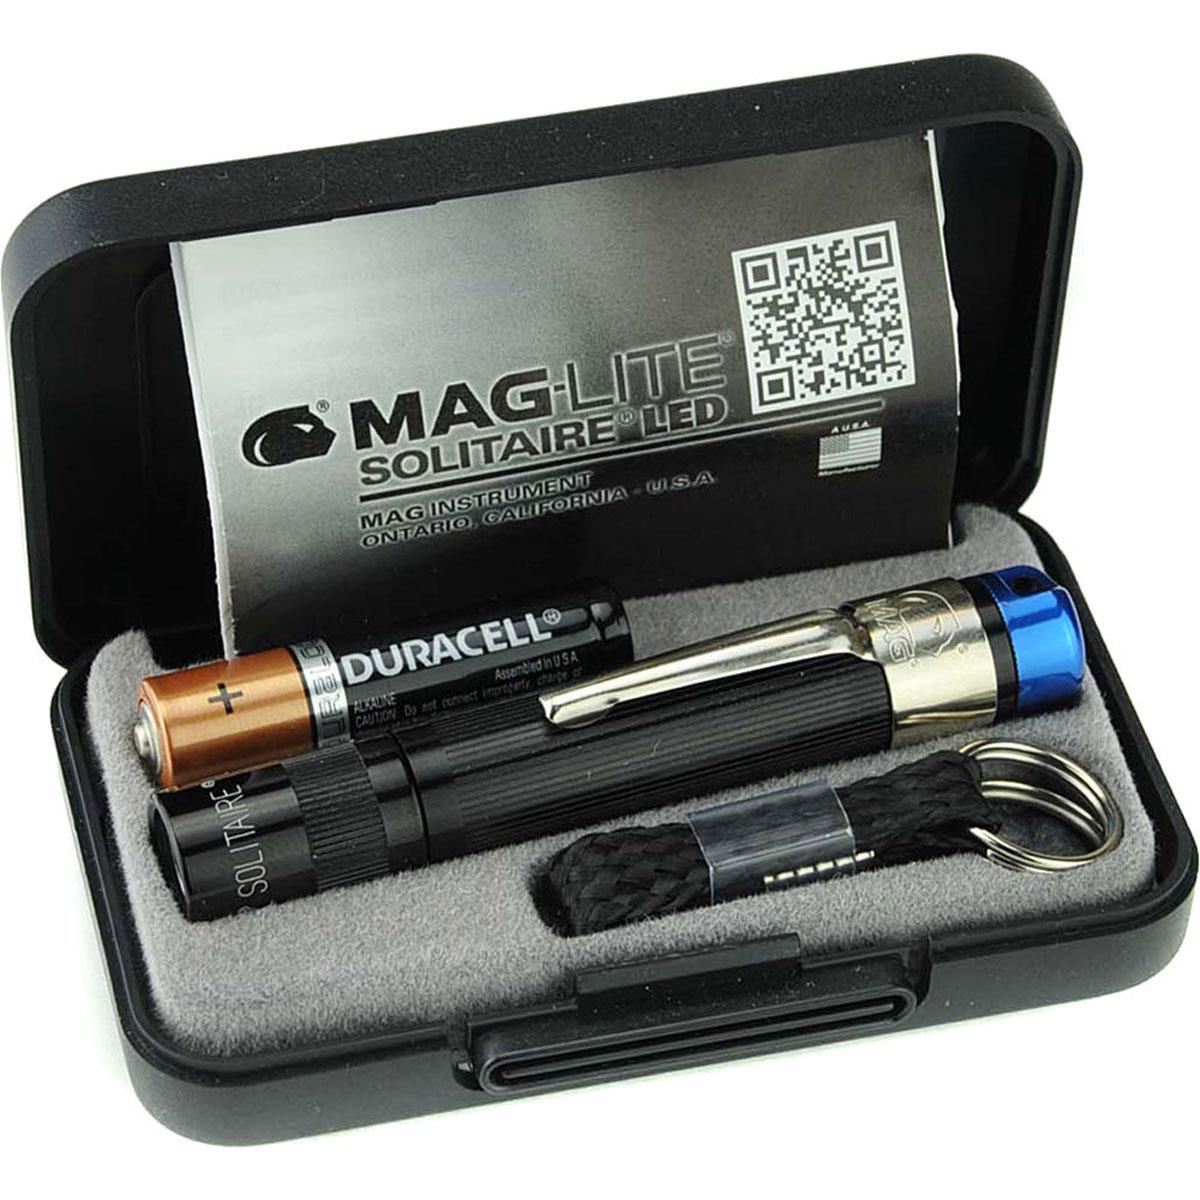 

MagLite Spectrum Solitaire 1-Cell AAA Blue LED Flashlight, Presentation Box